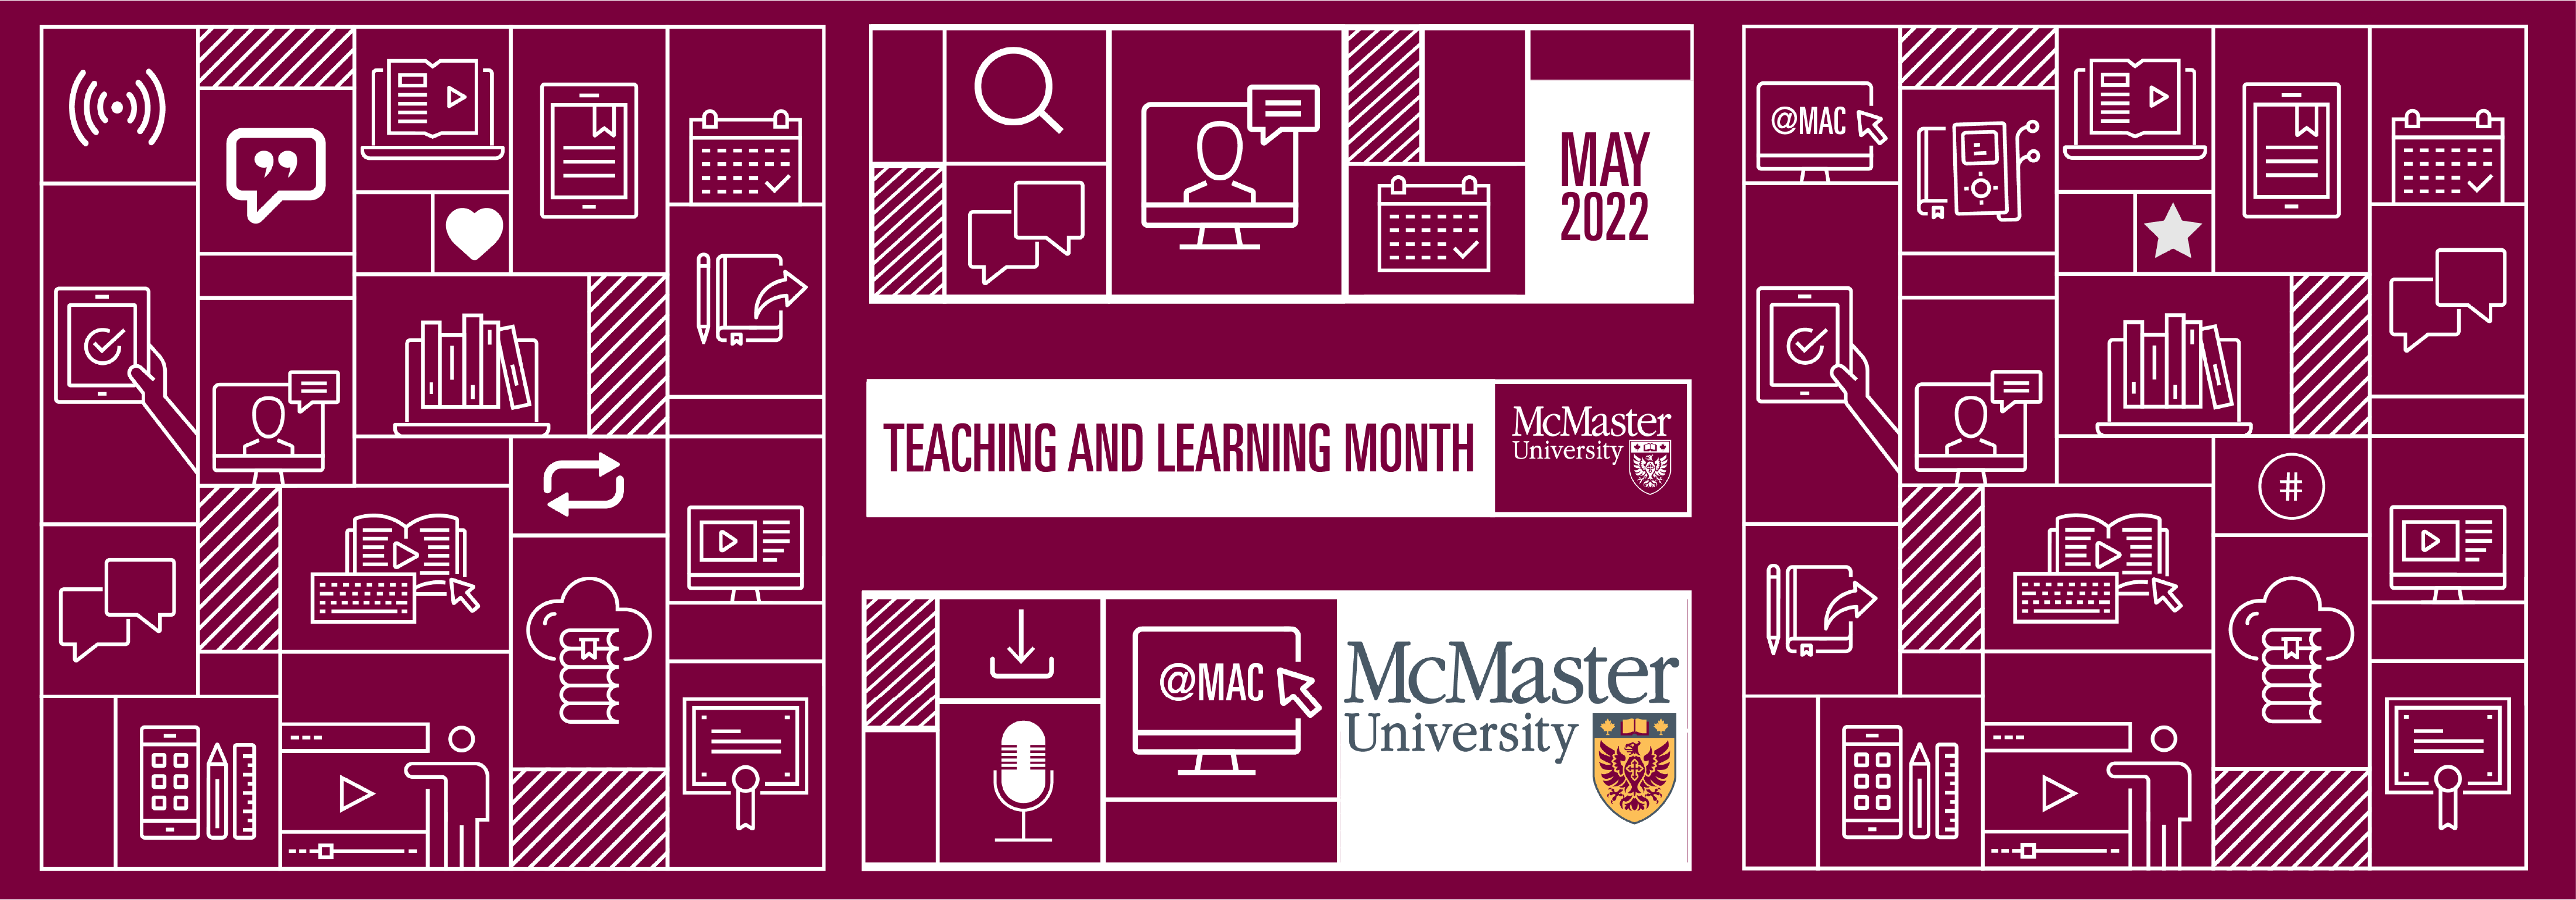 Graphic image containing icons relating to teaching and learning themes with McMaster University logo